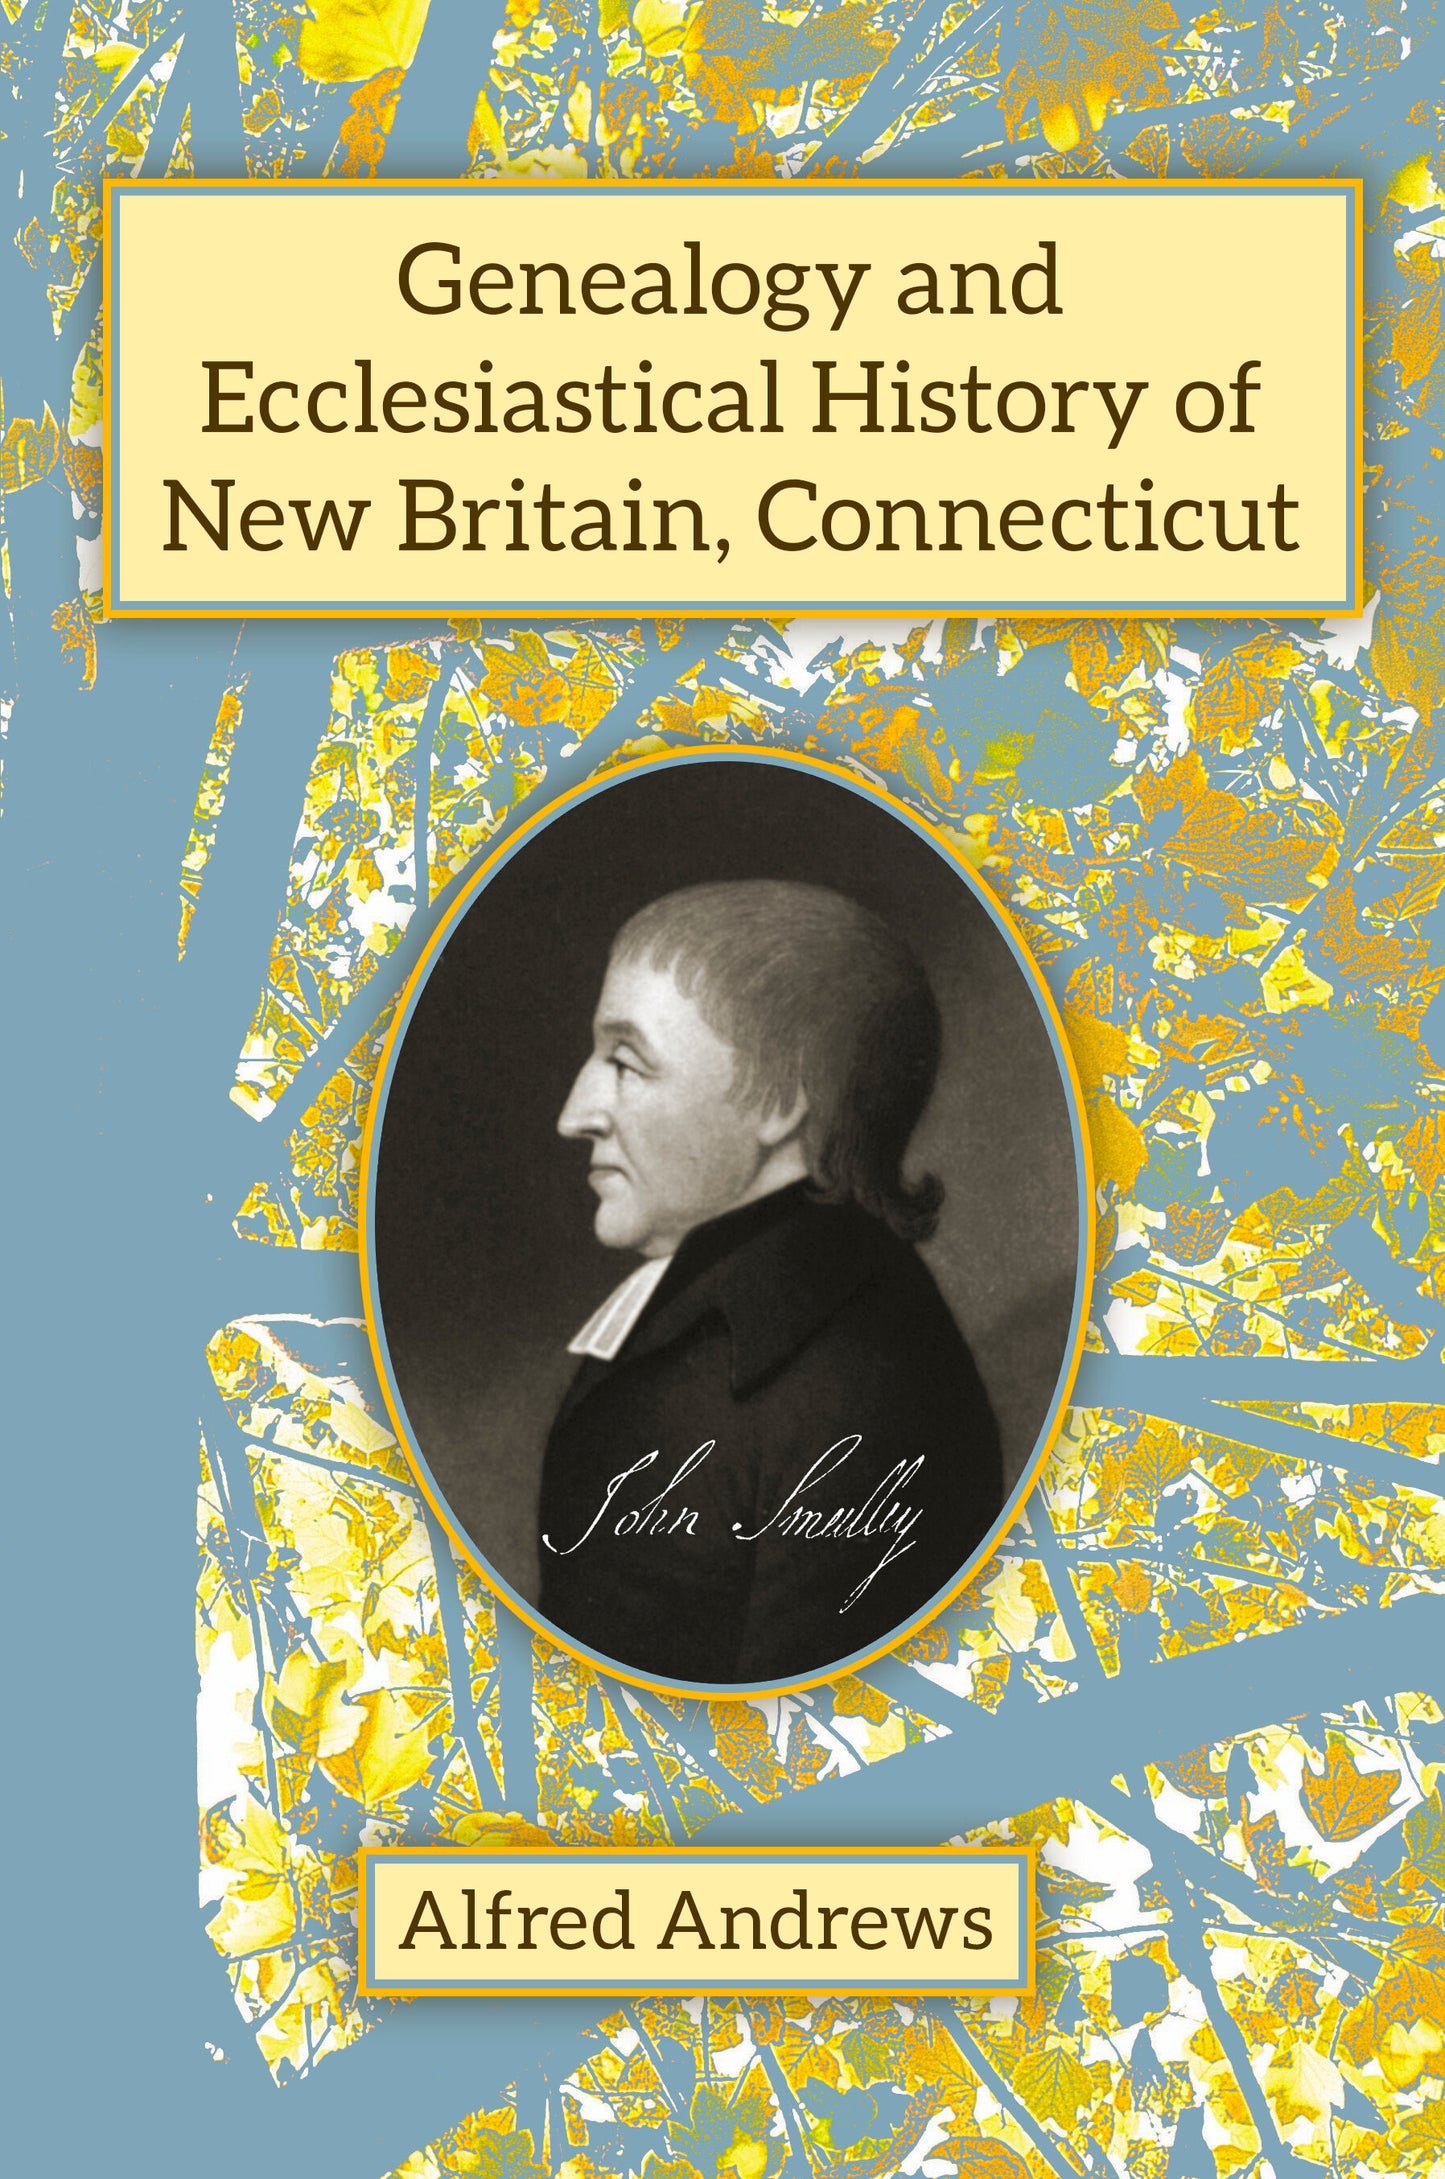 Genealogy and Ecclesiastical History of New Britain